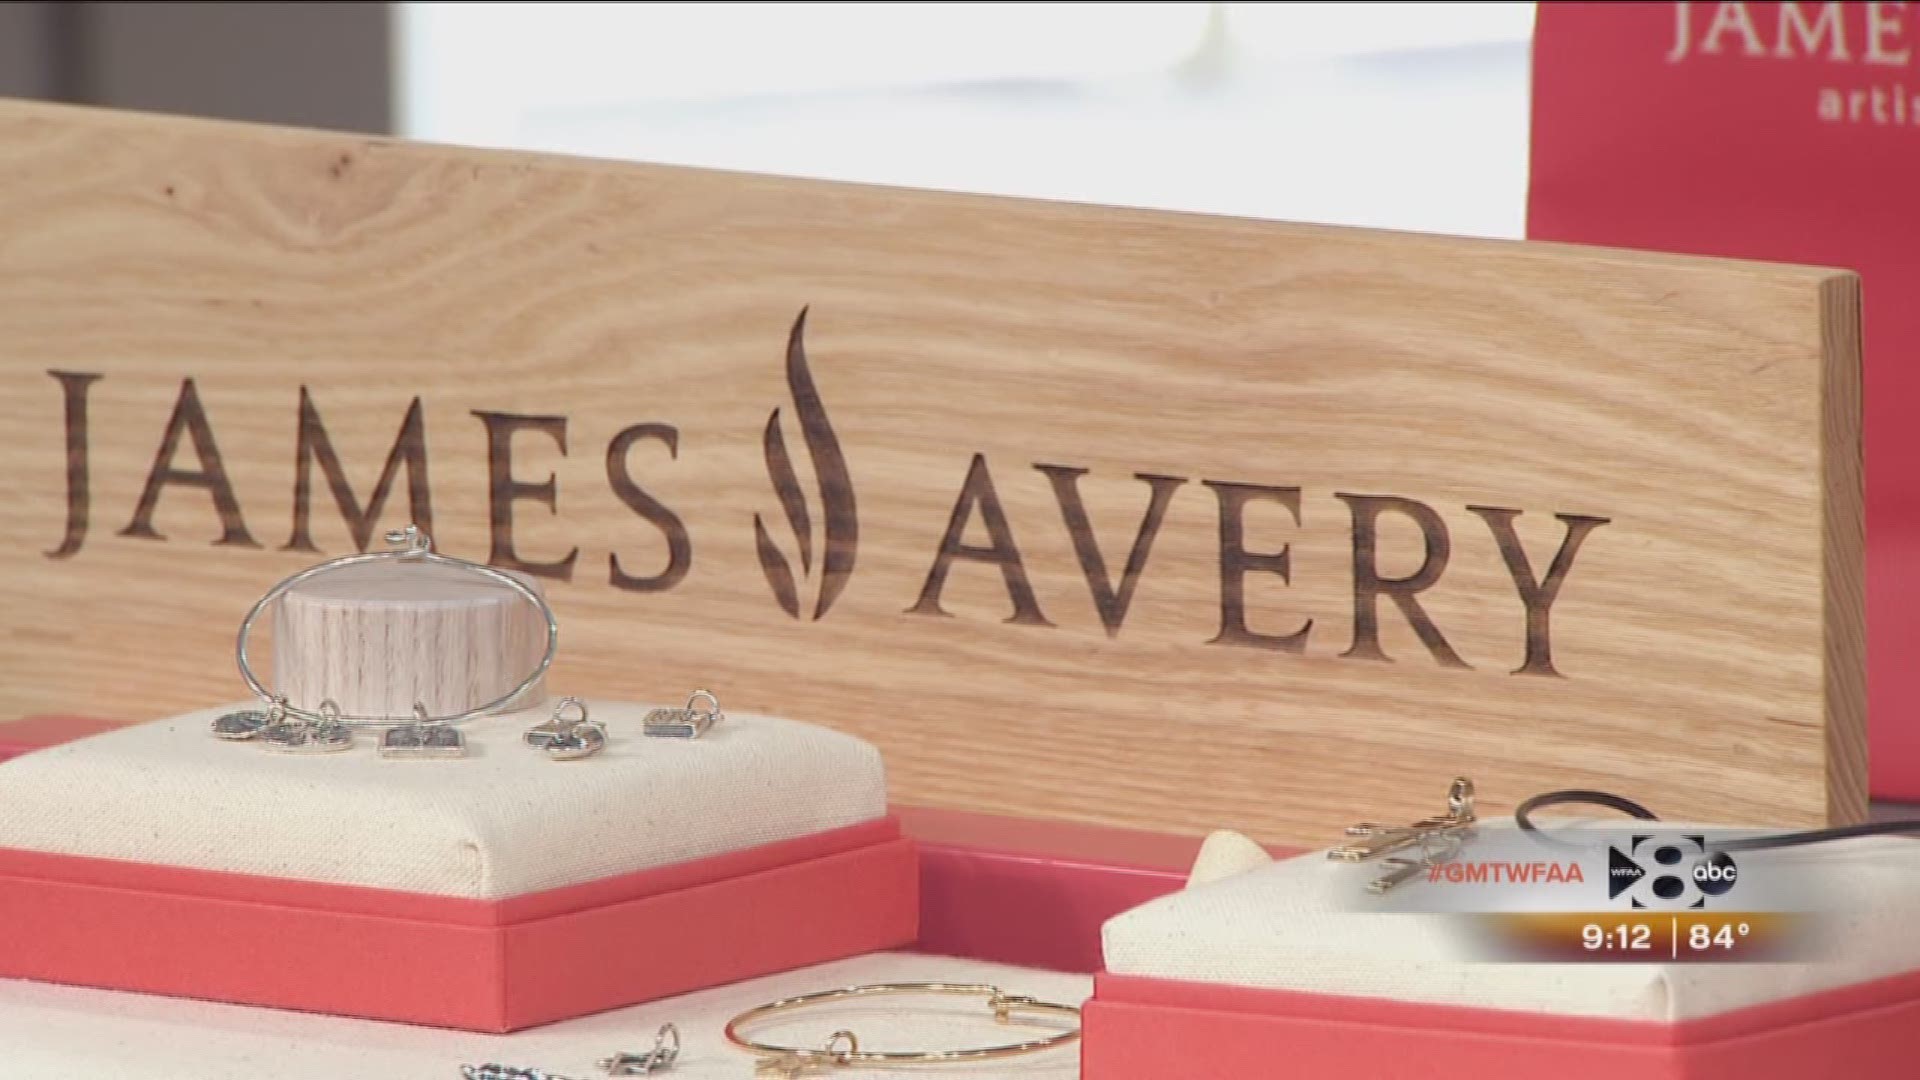 It's official! The jewelry giant James Avery is bringing more jobs to Cedar Park.